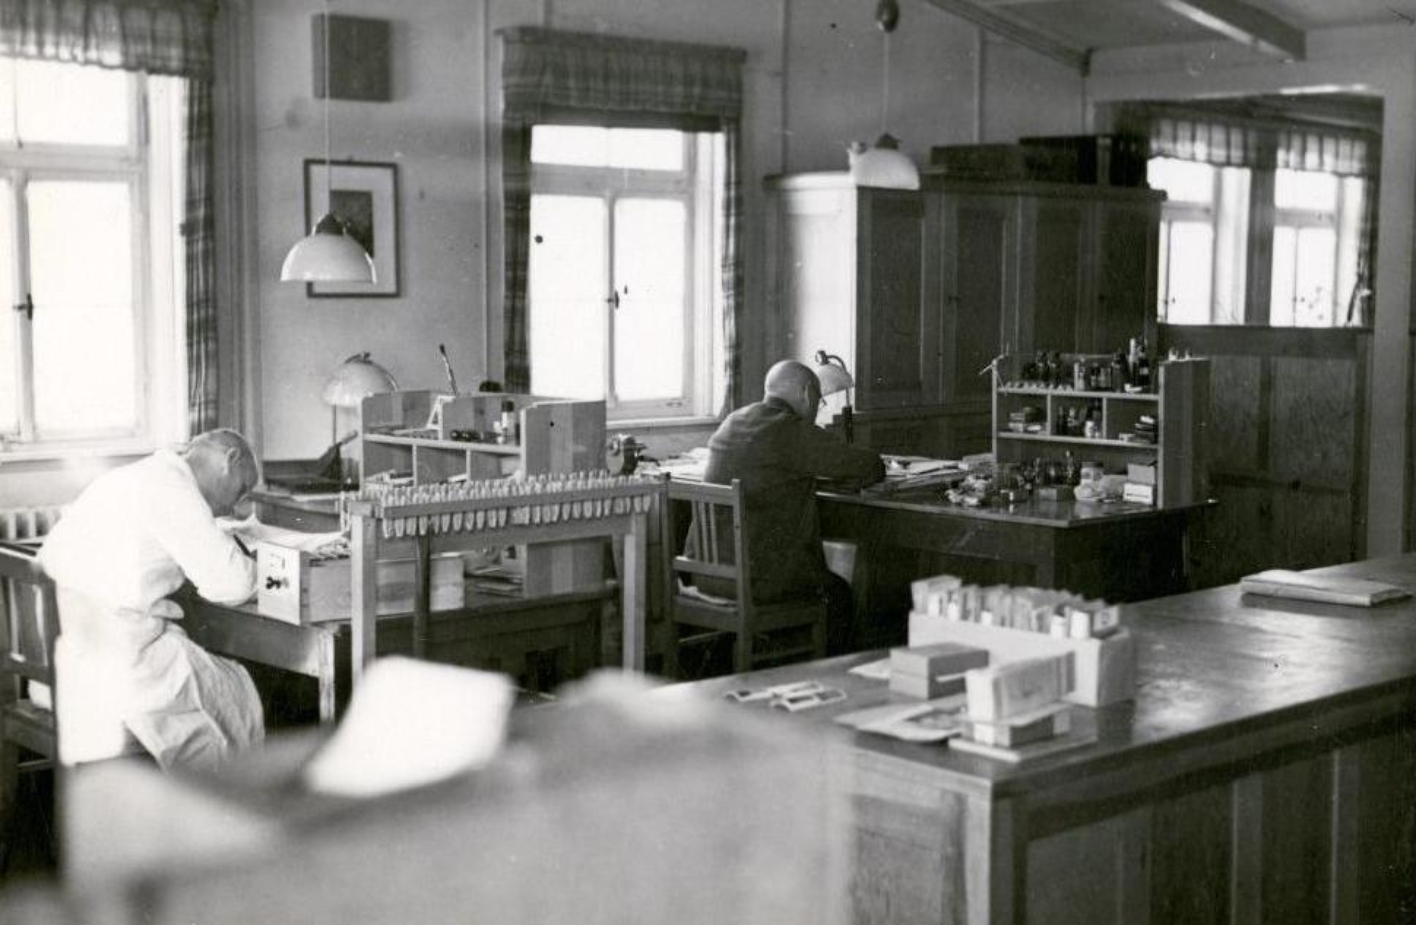 Two prisoners at archival work in the office of the recognition service photographed diagonally from behind. On the right, presumably the prisoner Karl Siebeneichler dressed in white. On the left, another prisoner dressed in black.